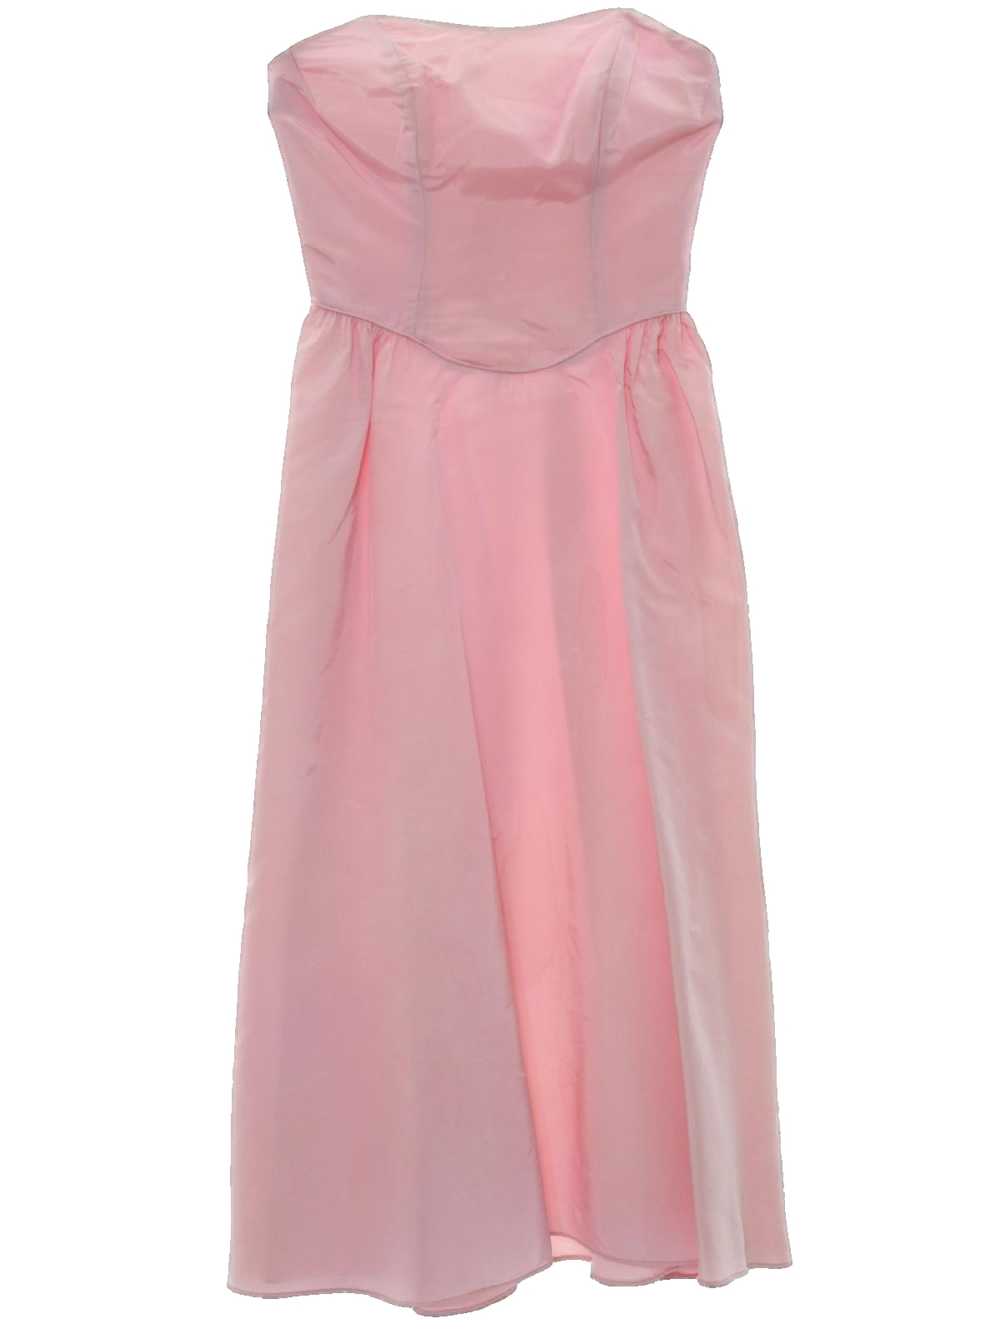 1980's Totally 80s Prom Or Cocktail Dress - image 1